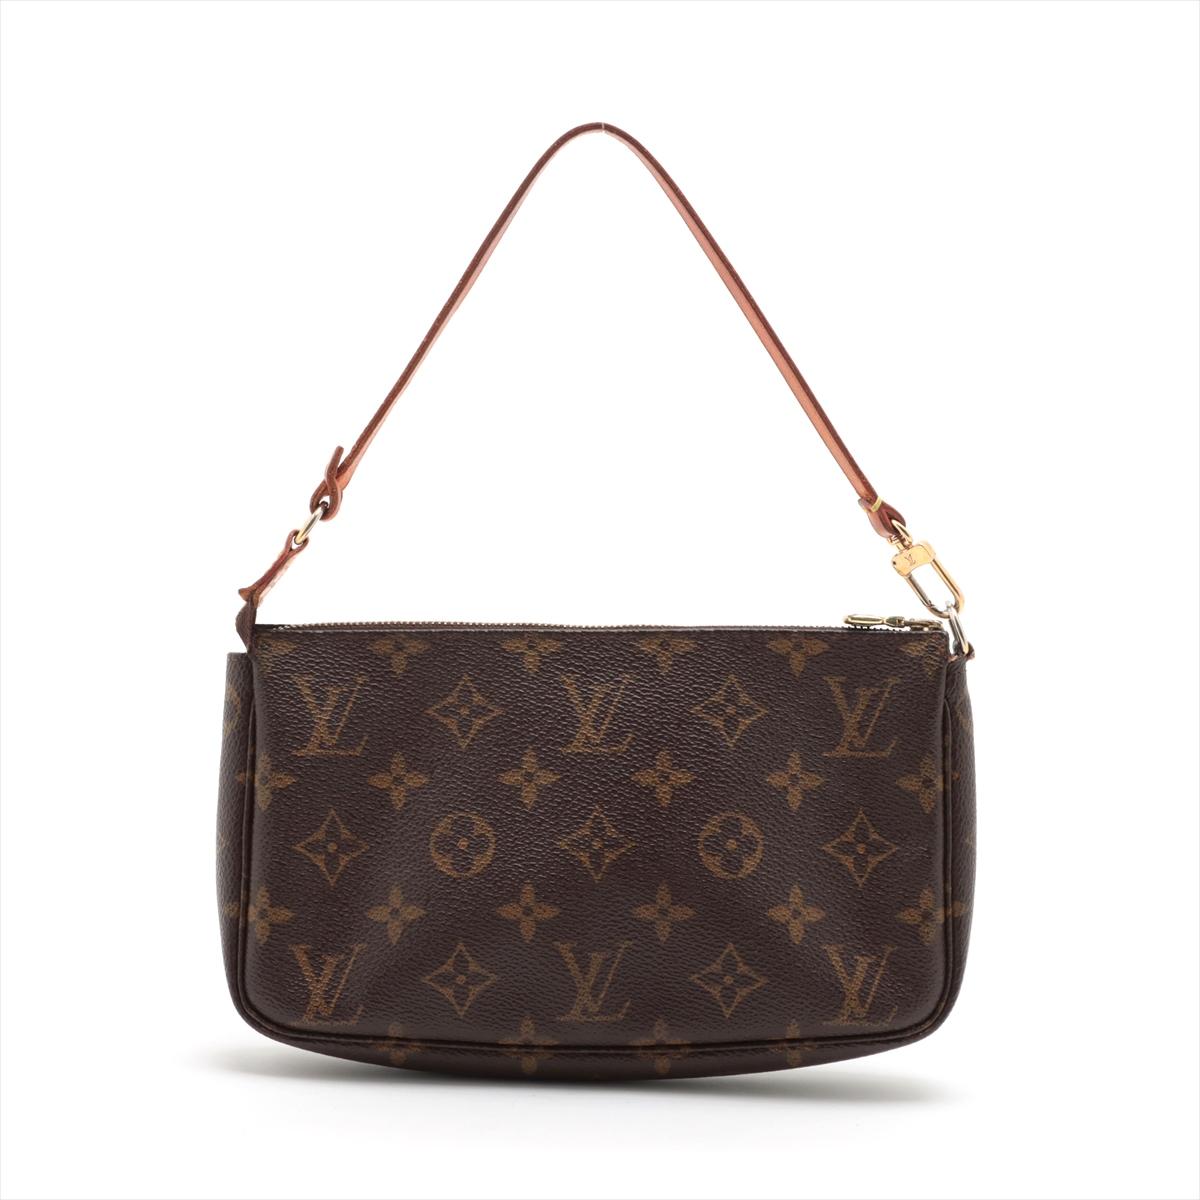 Louis Vuitton Monogram Pochette Accessoires In Good Condition For Sale In Indianapolis, IN